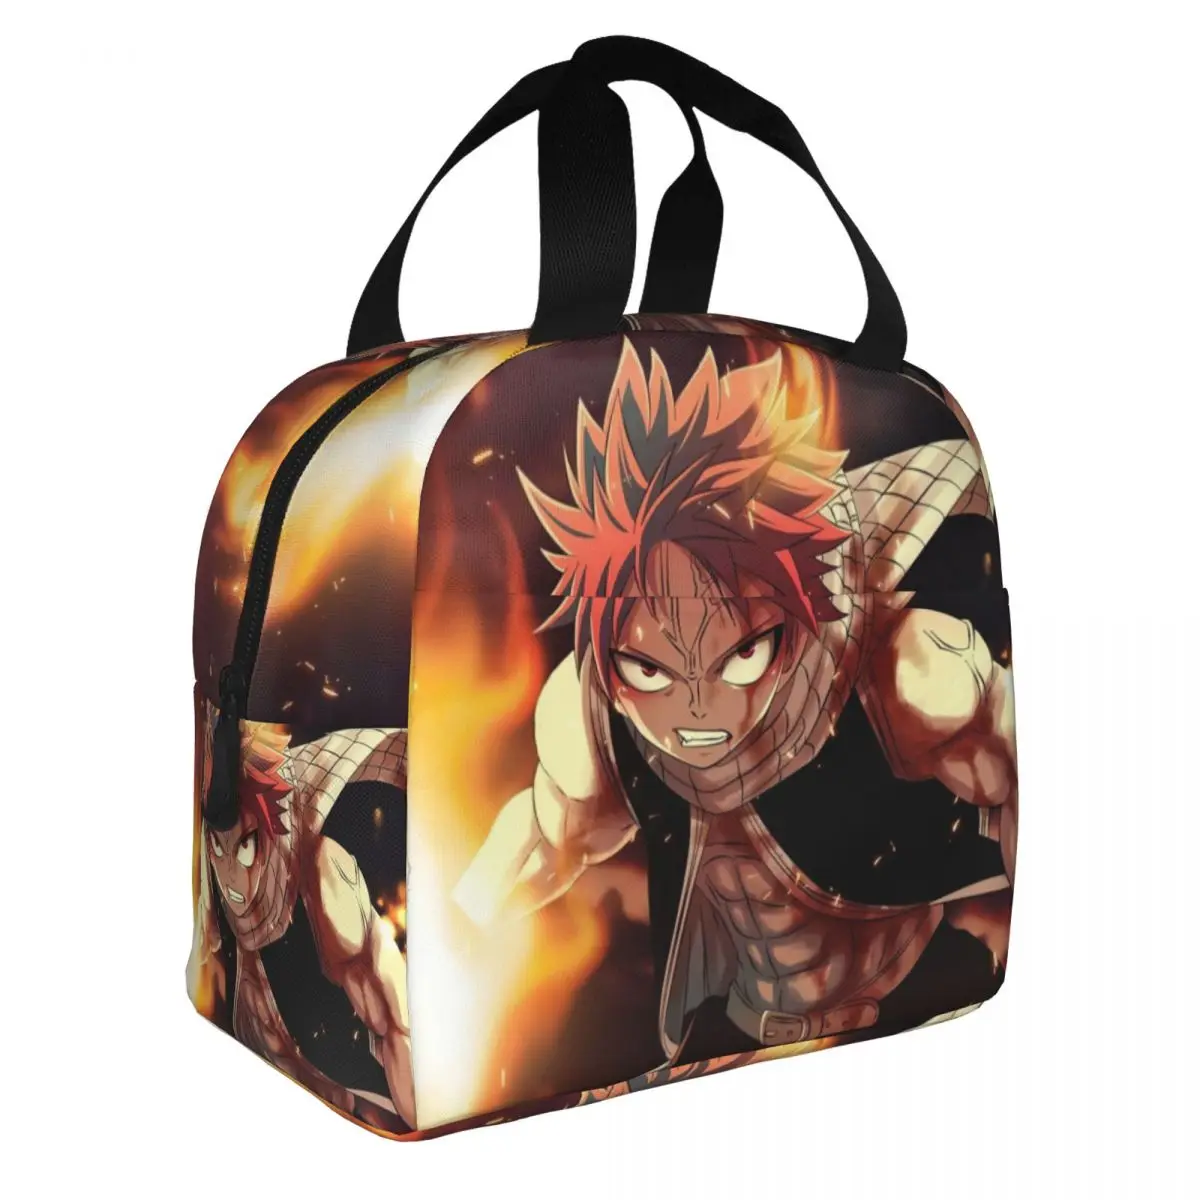 Anime - Fairy Tail Lunch Bento Bags Portable Aluminum Foil thickened Thermal Cloth Lunch Bag for Women Men Boy